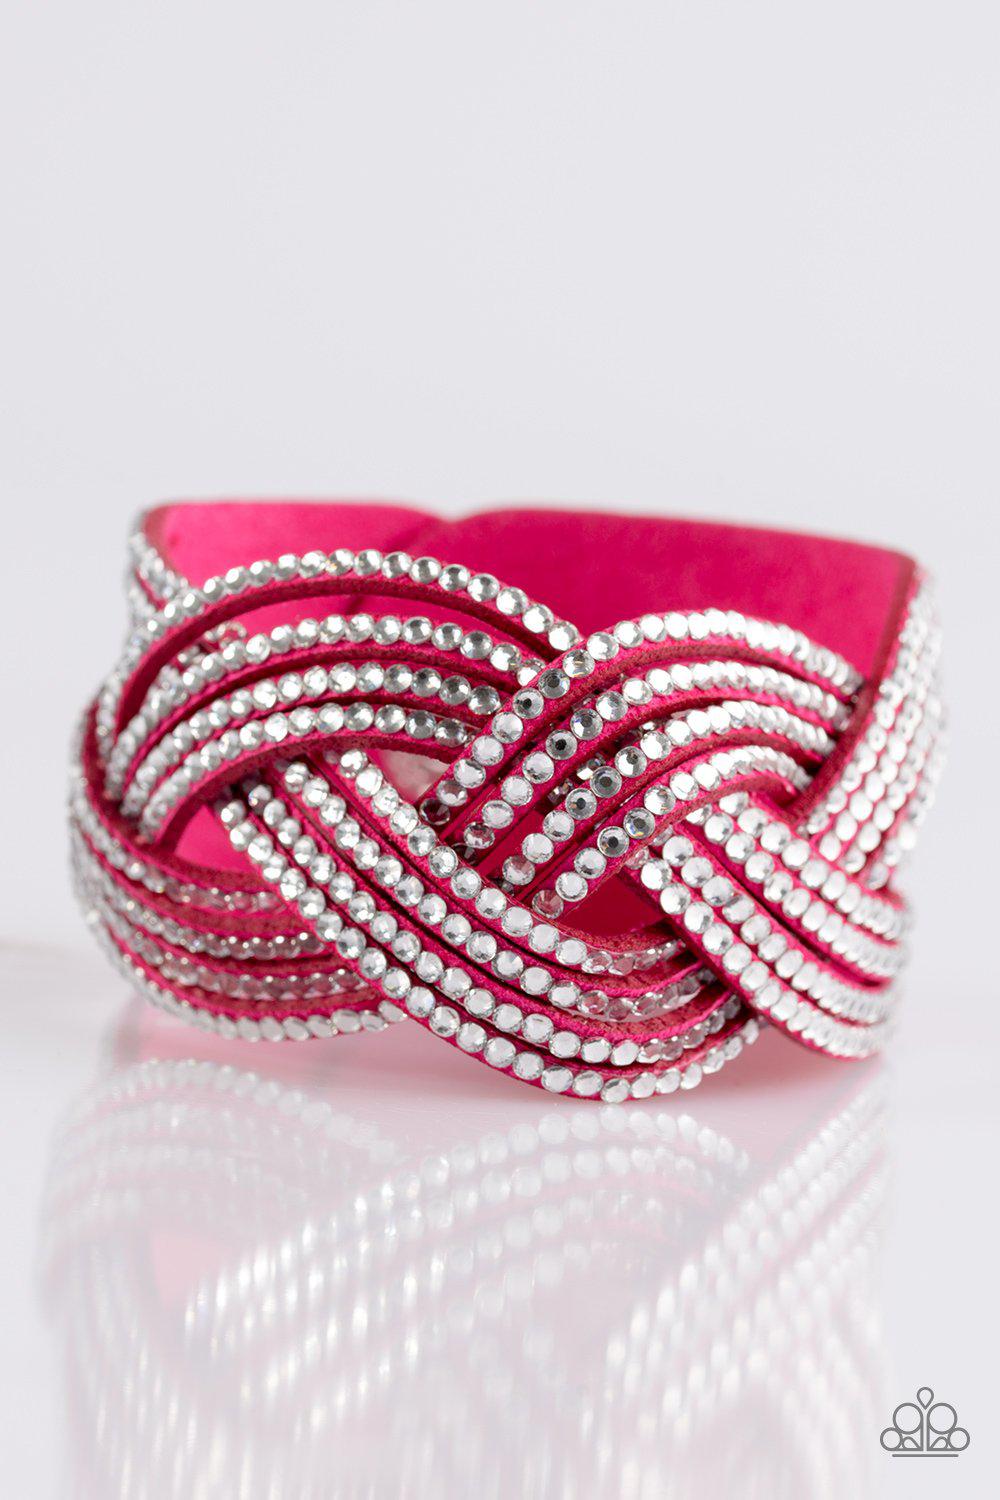 Big City Shimmer Hot Pink and White Braided Wrap Snap Bracelet - Paparazzi Accessories-CarasShop.com - $5 Jewelry by Cara Jewels